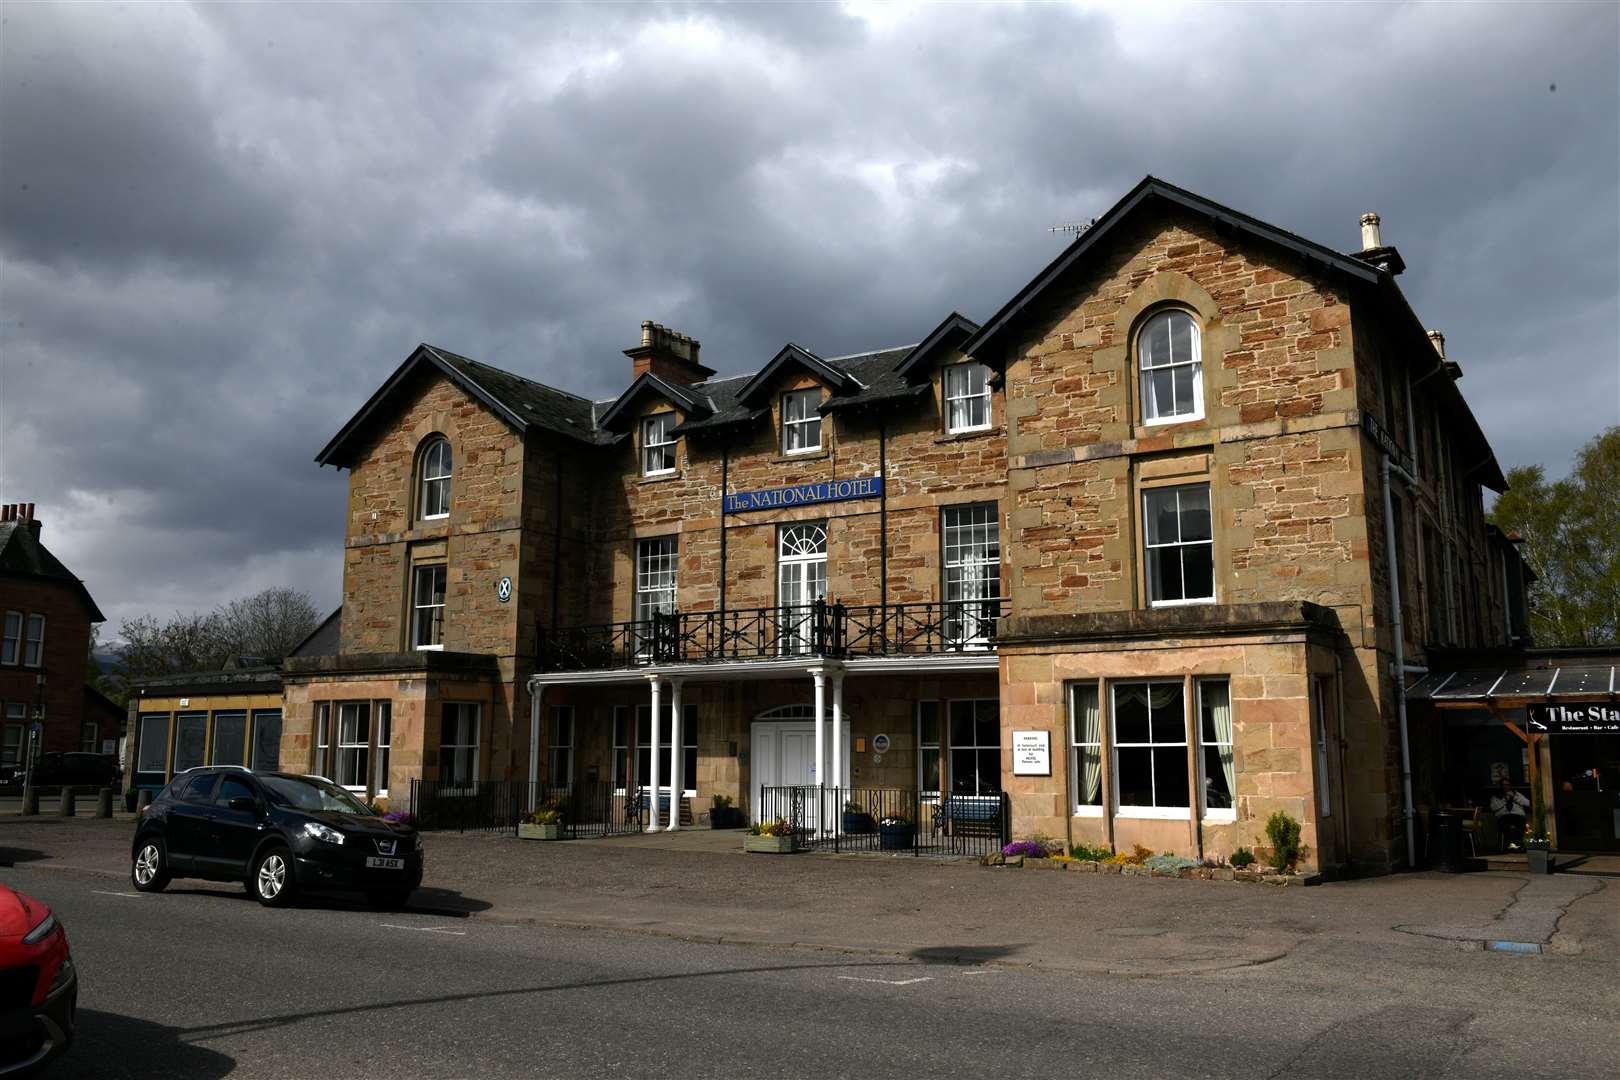 The court heard details of how the altercation unfolded at The National Hotel in Dingwall.